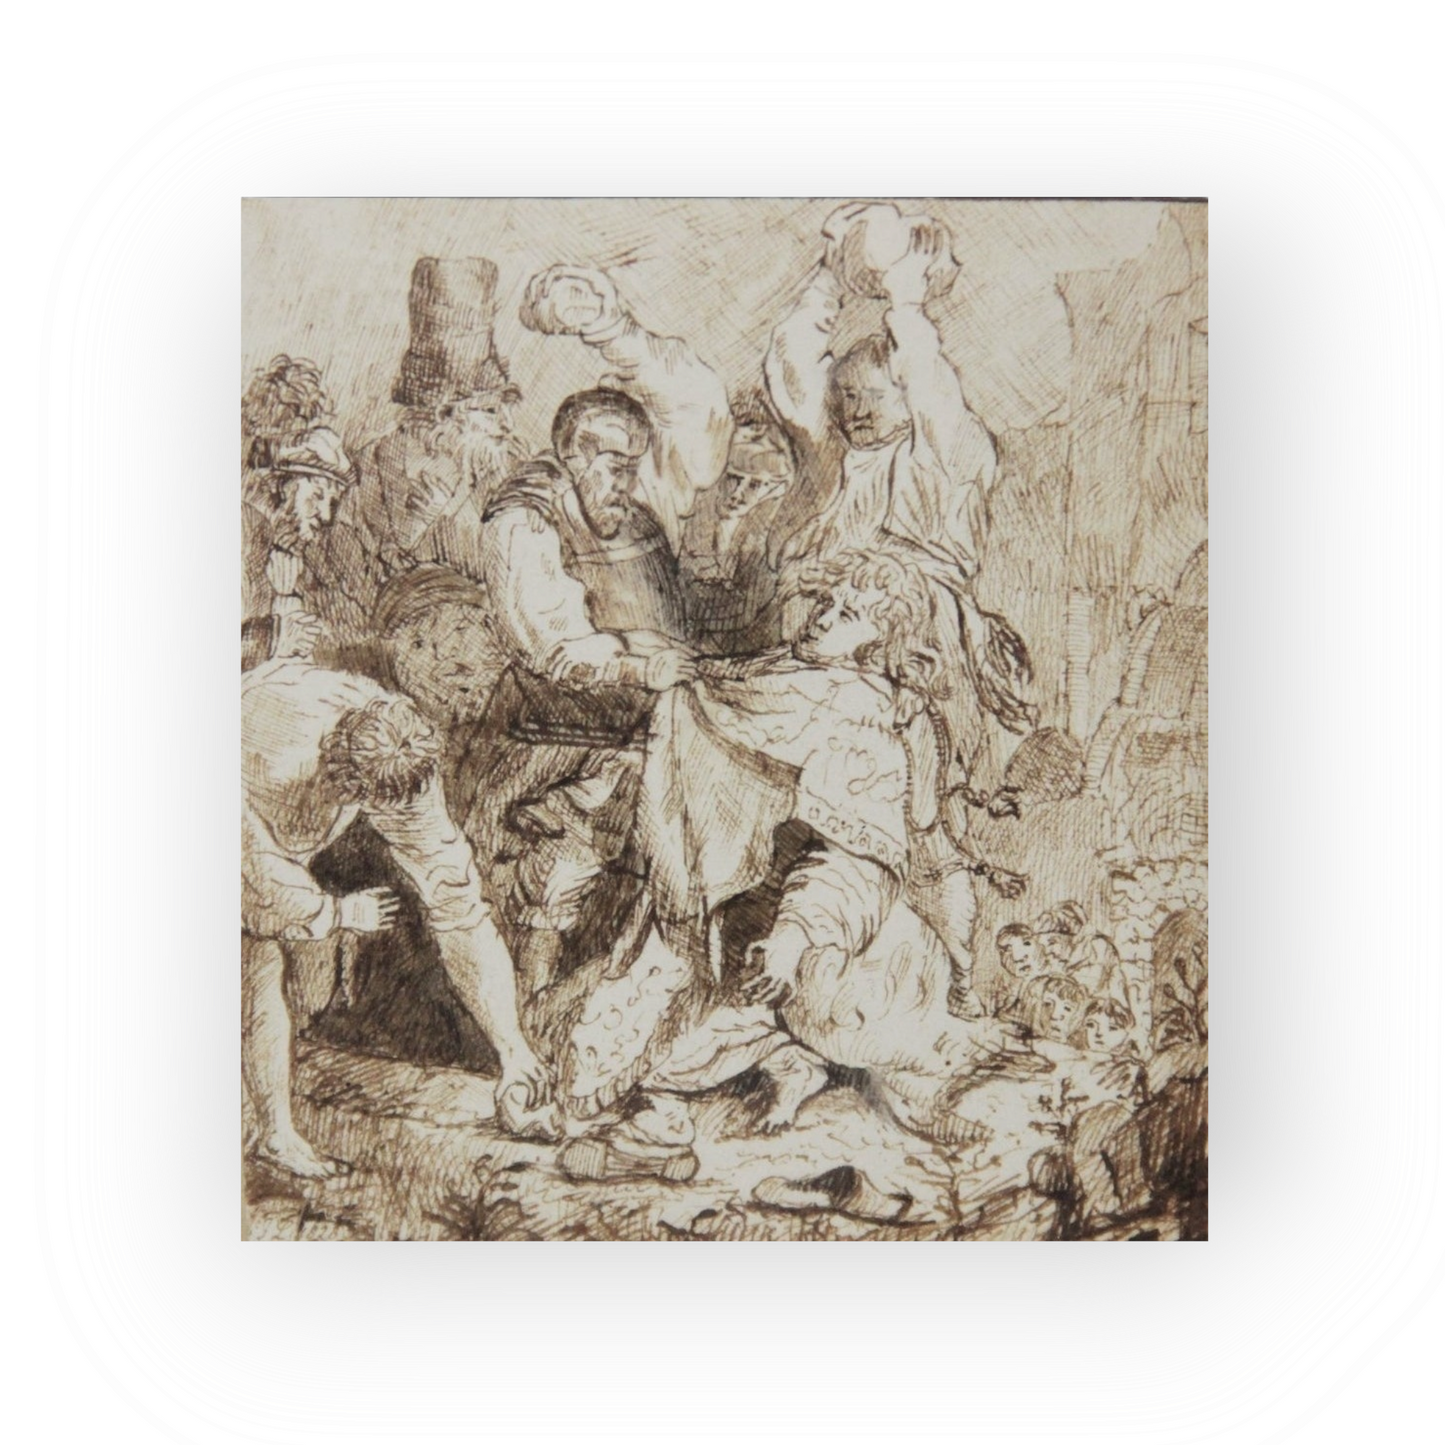 Follower of Rembrandt (1606-1669) - An early 19th Century Continental School Pen and Ink Drawing Depicting the Stoning of St. Stephen